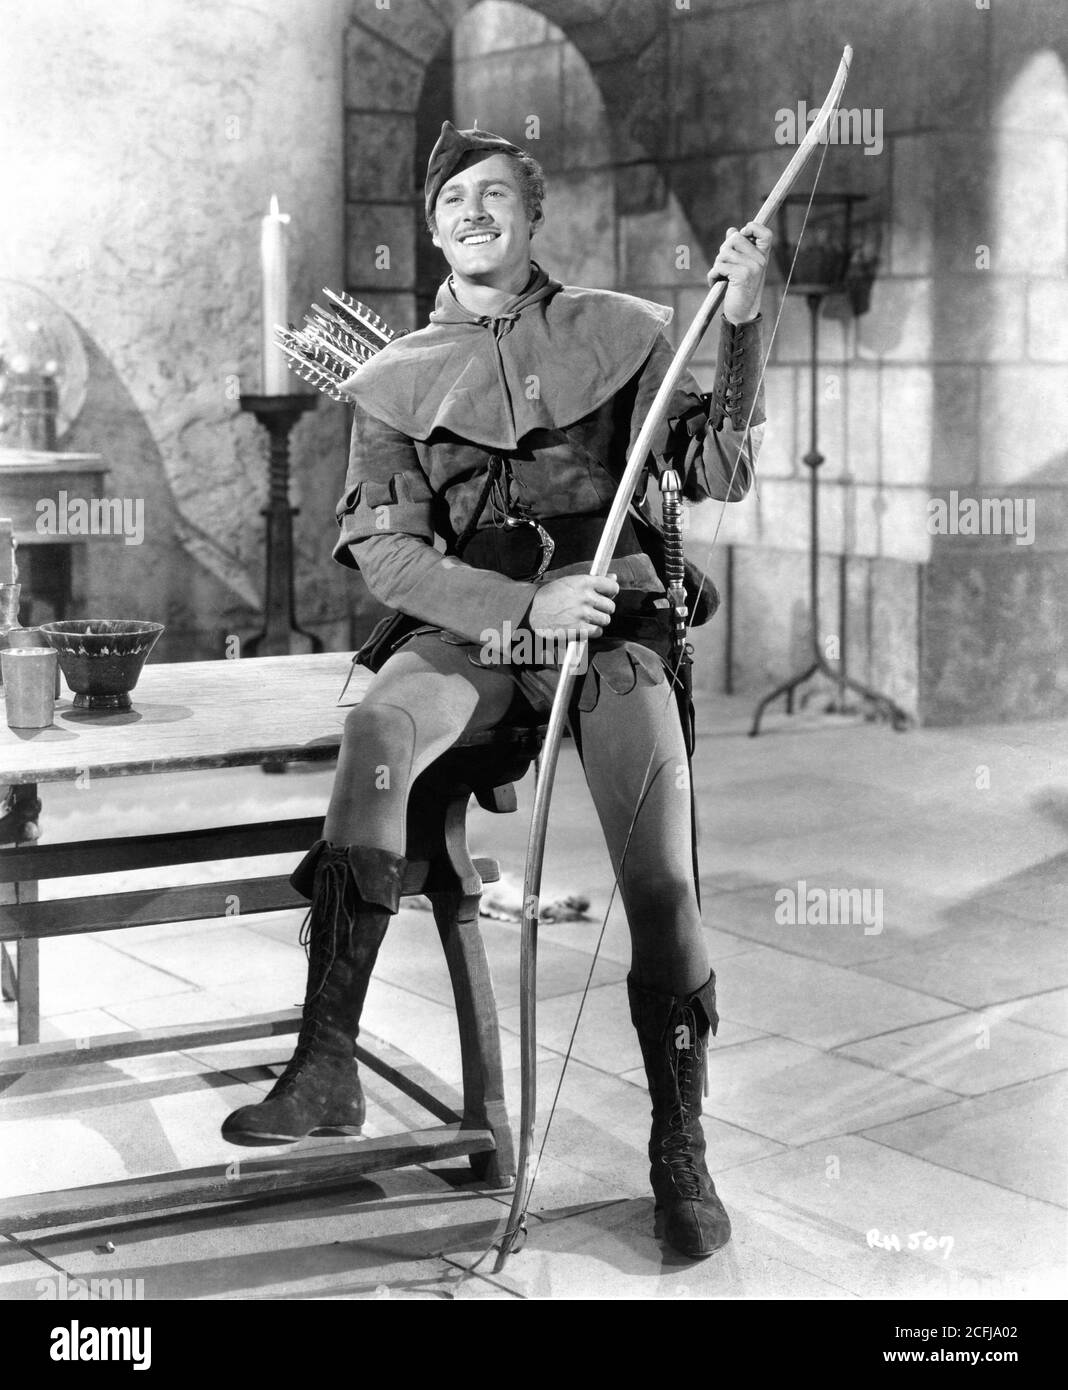 ERROL FLYNN Full Length Portrait for THE ADVENTURES OF ROBIN HOOD 1938 directors MICHAEL CURTIZ and WILLIAM KEIGHLEY music Erich Wolfgang Korngold Warner Bros. Stock Photo